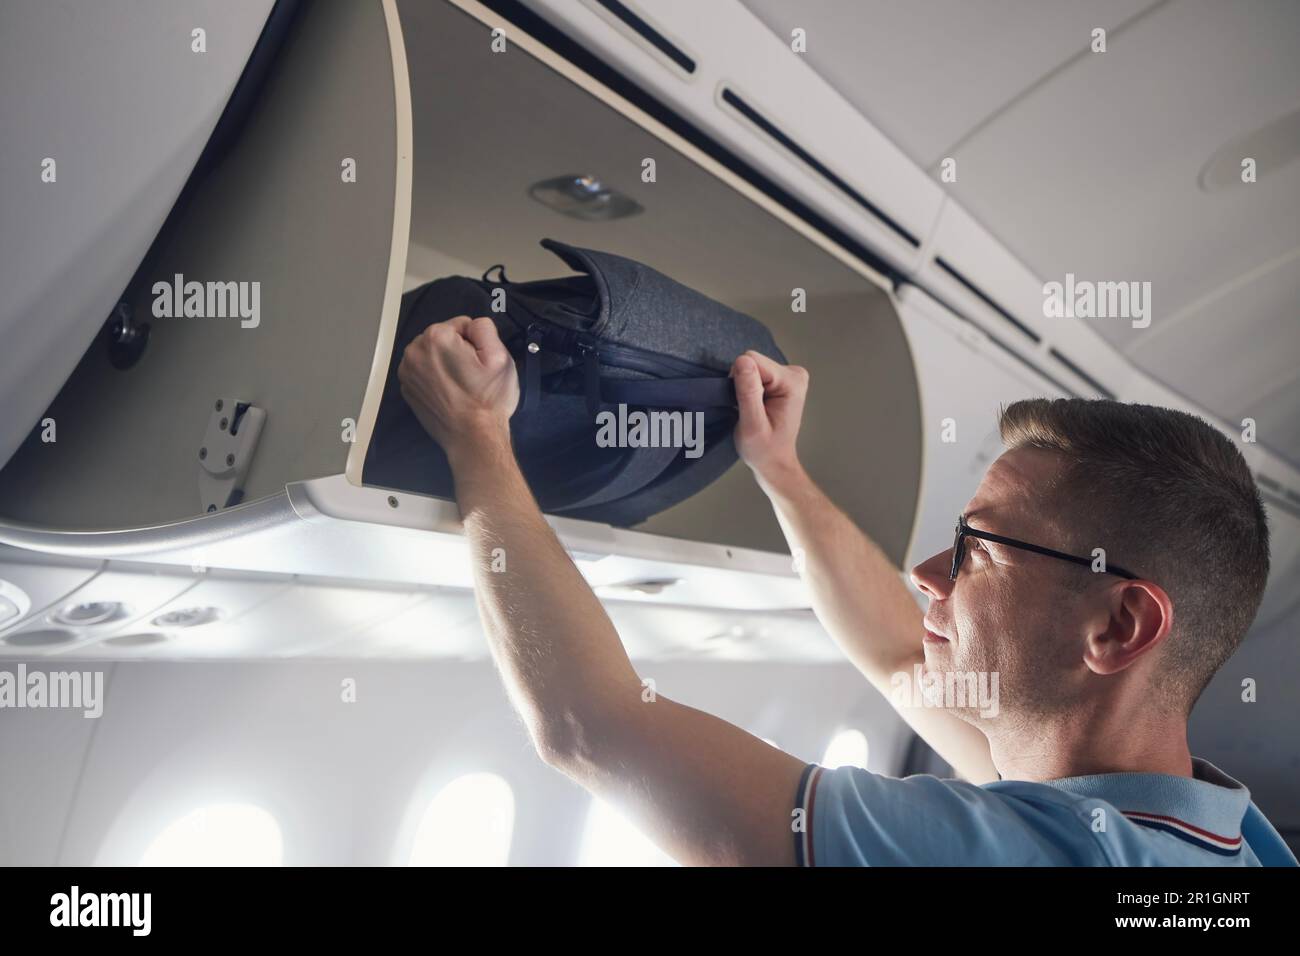 Man travel by airplane. Passenger putting hand baggage in lockers above seats of plane. Stock Photo